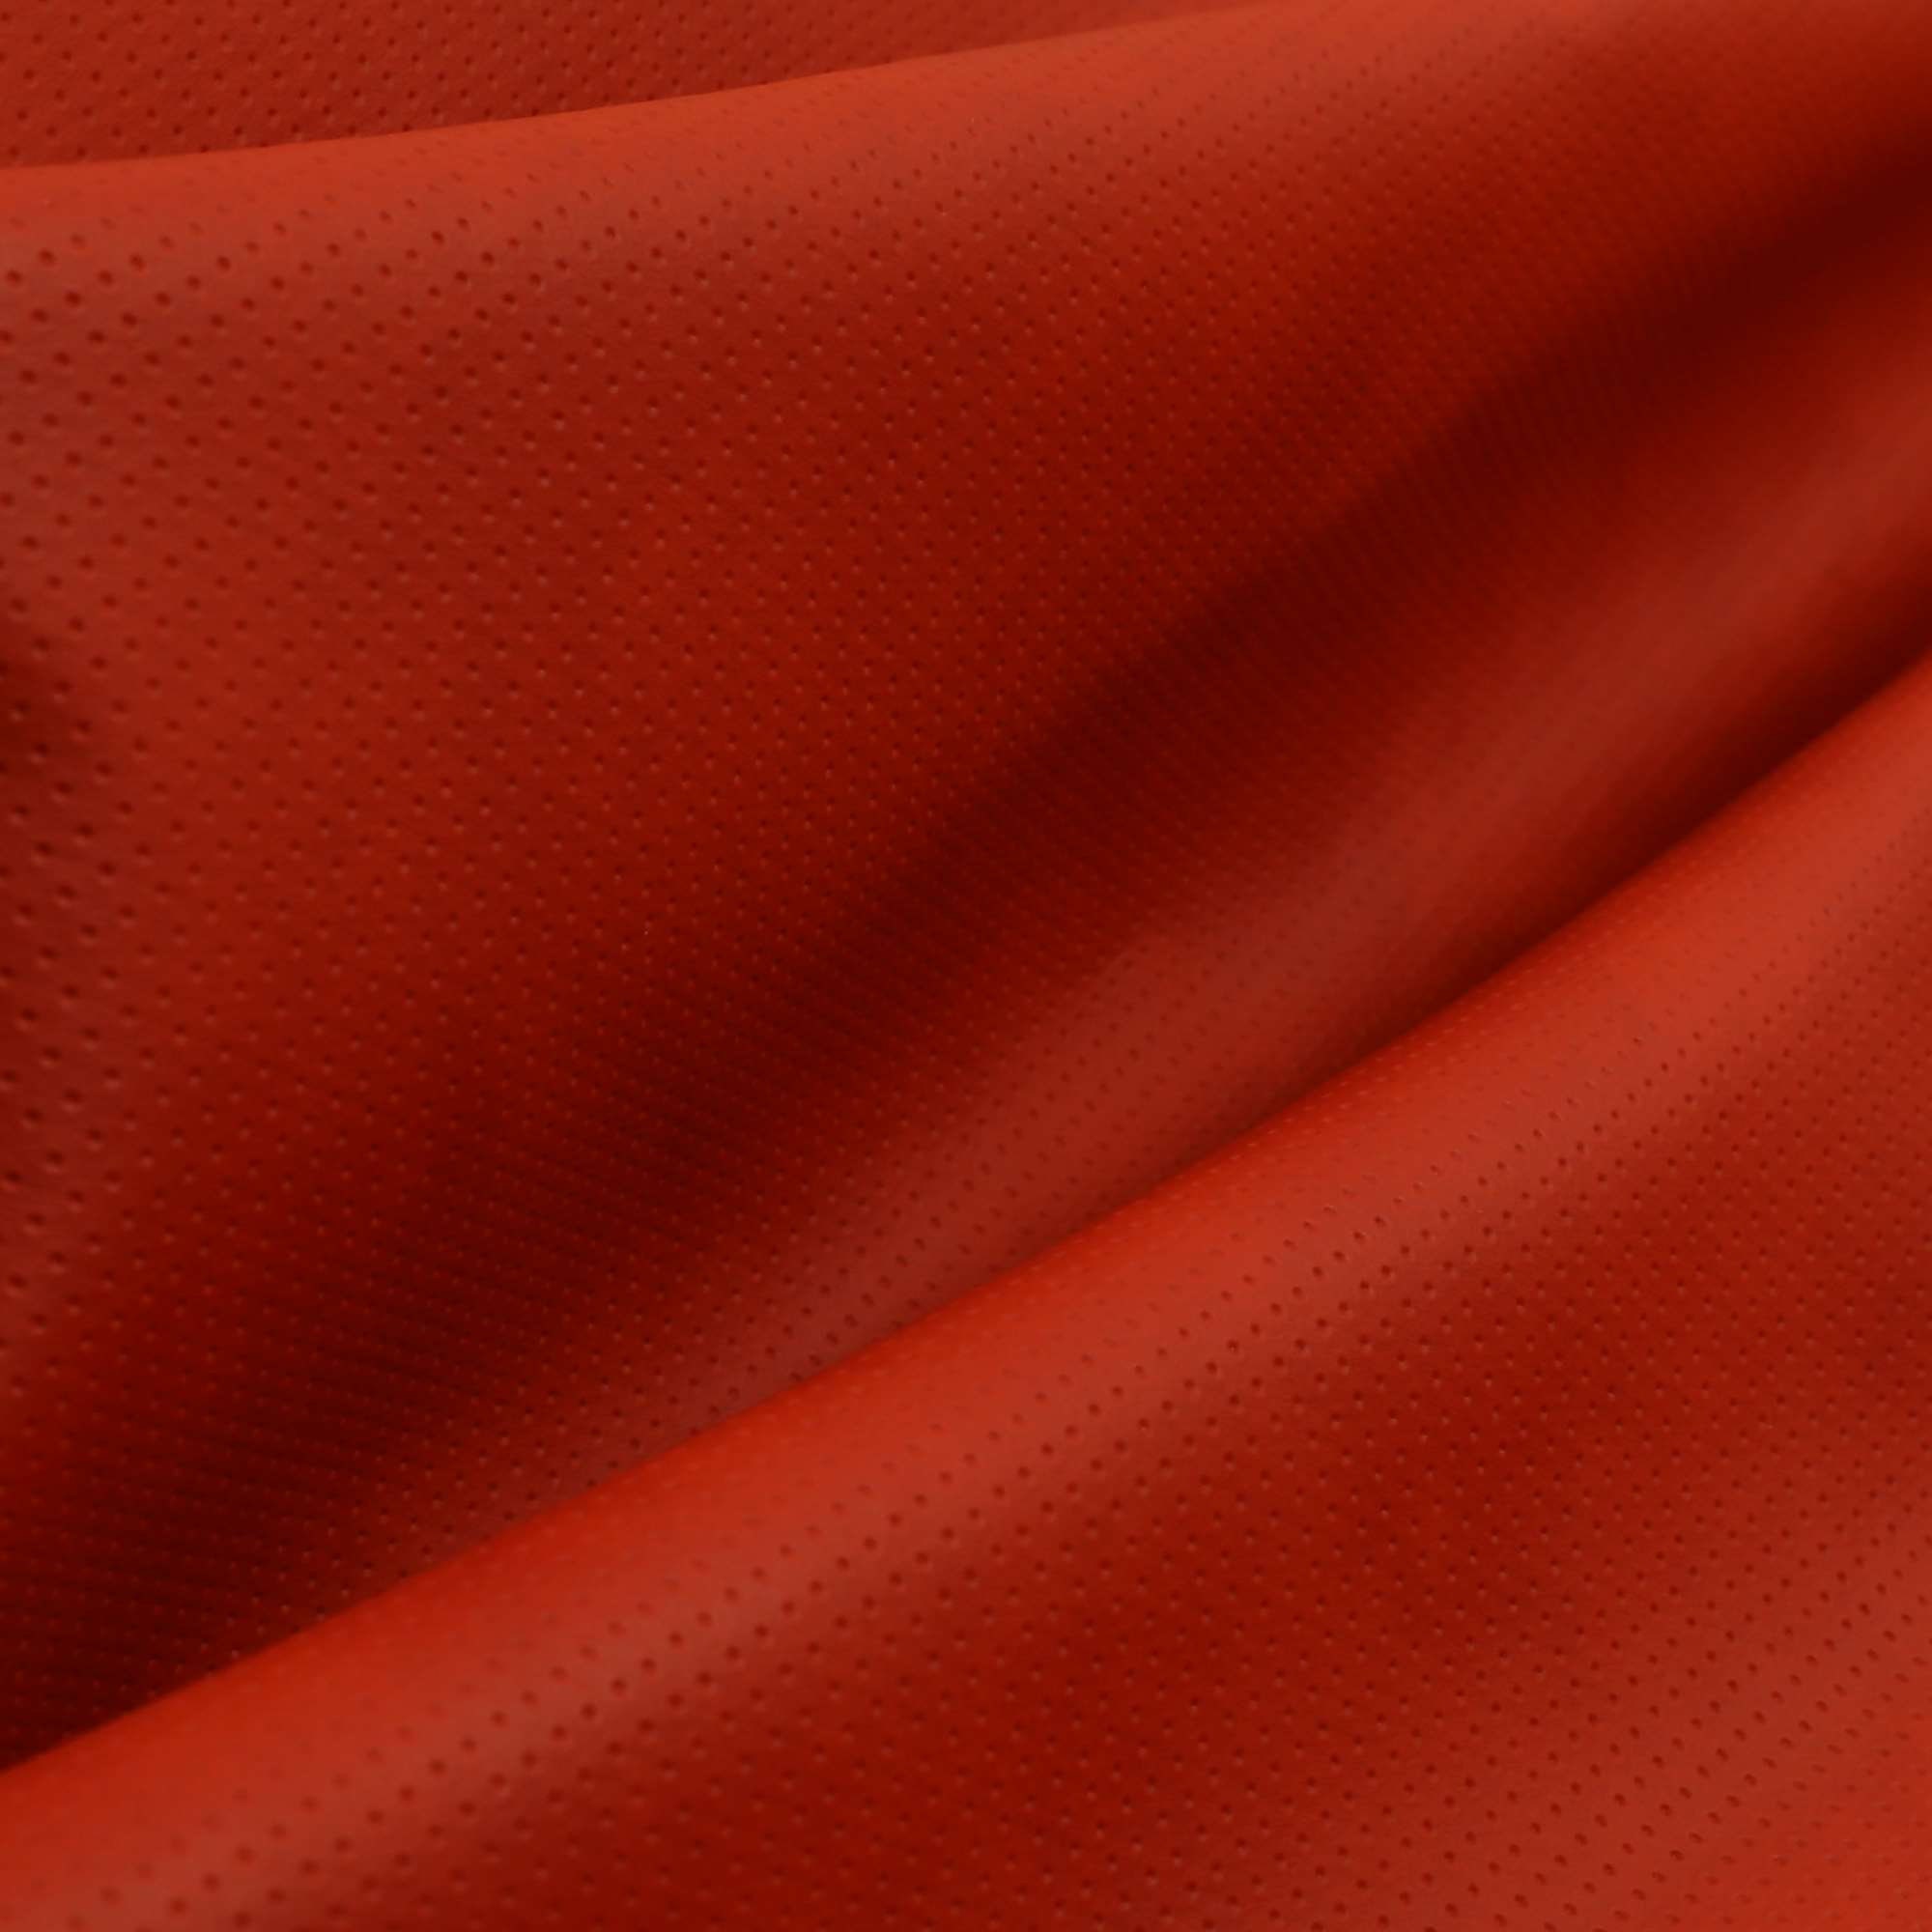 Perforated Faux Leather Fabric for Upholstery, Cushions & Interior